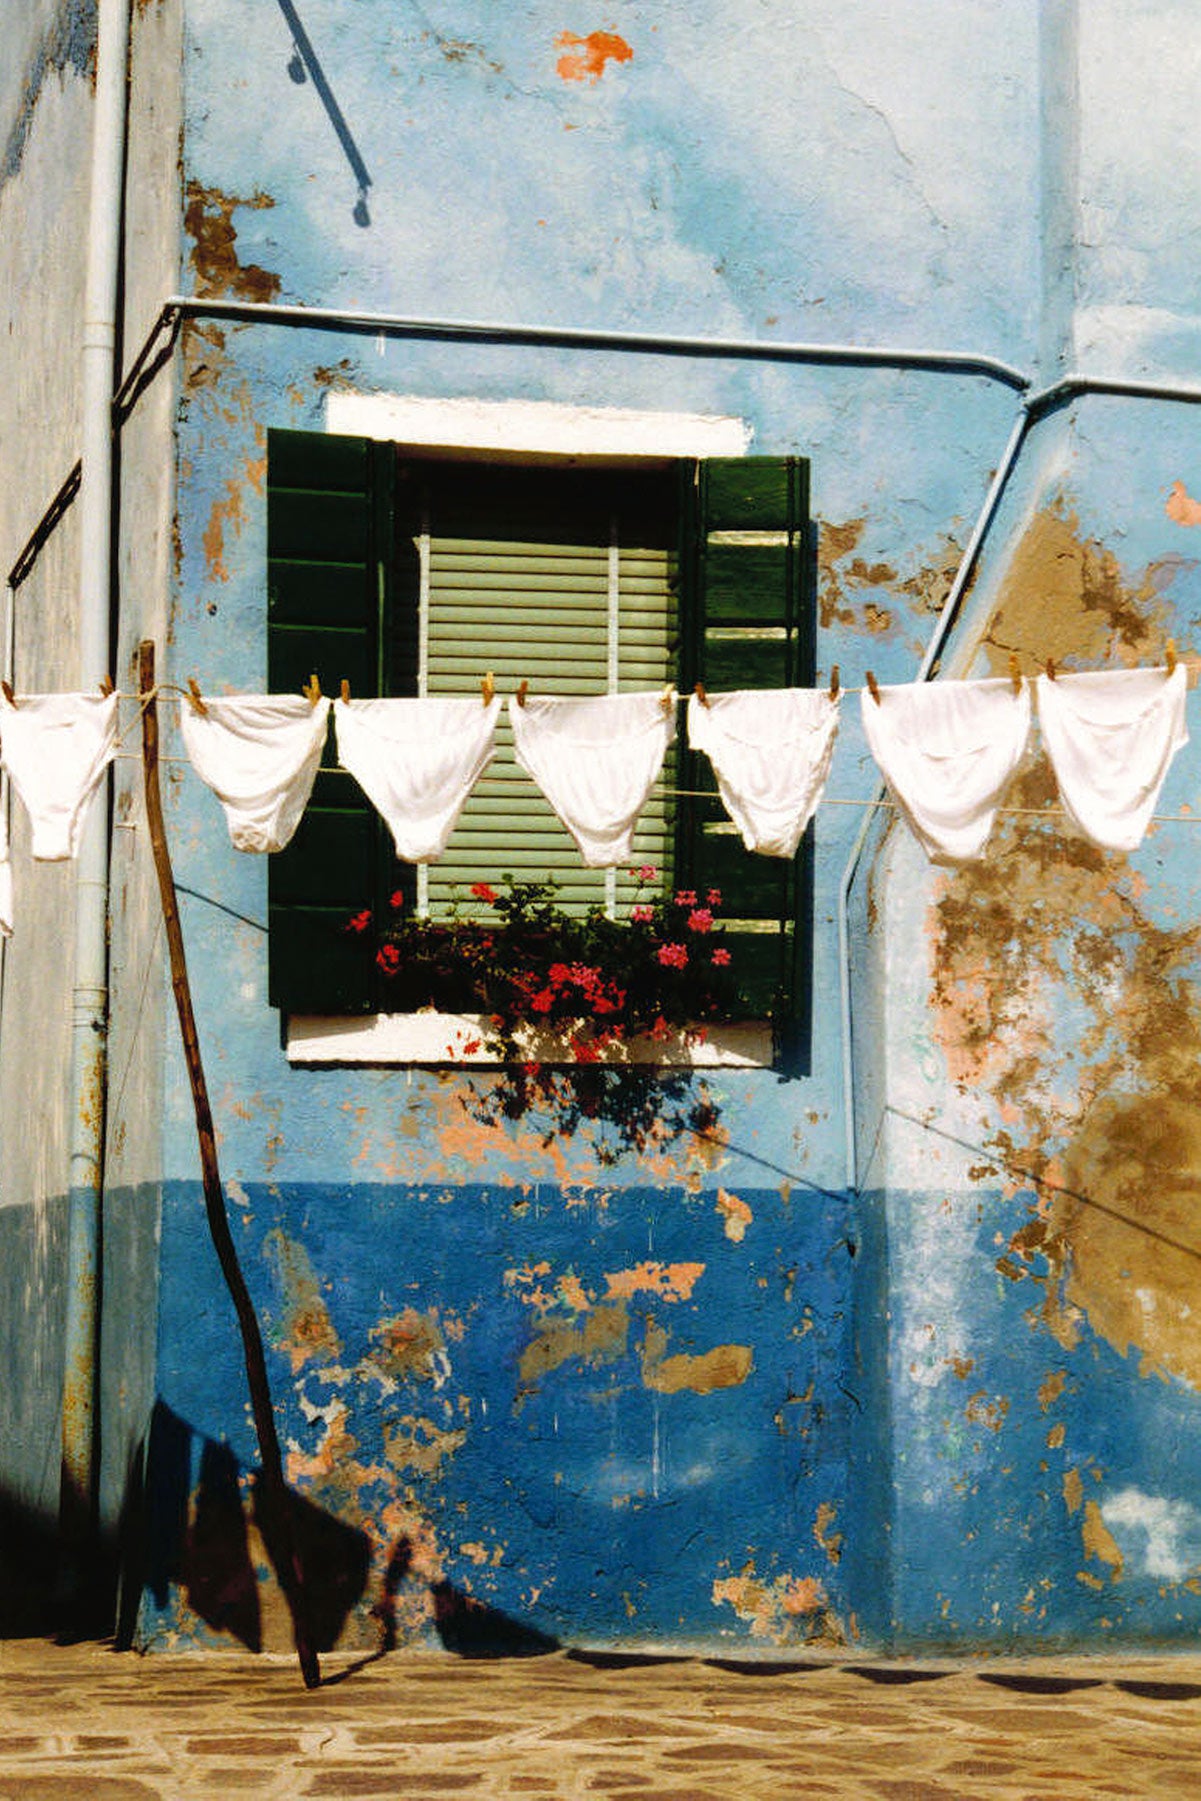 A washing line full of white knickers set against a colourful blue, but crumbling wall, with an inset window and window box of red roses.